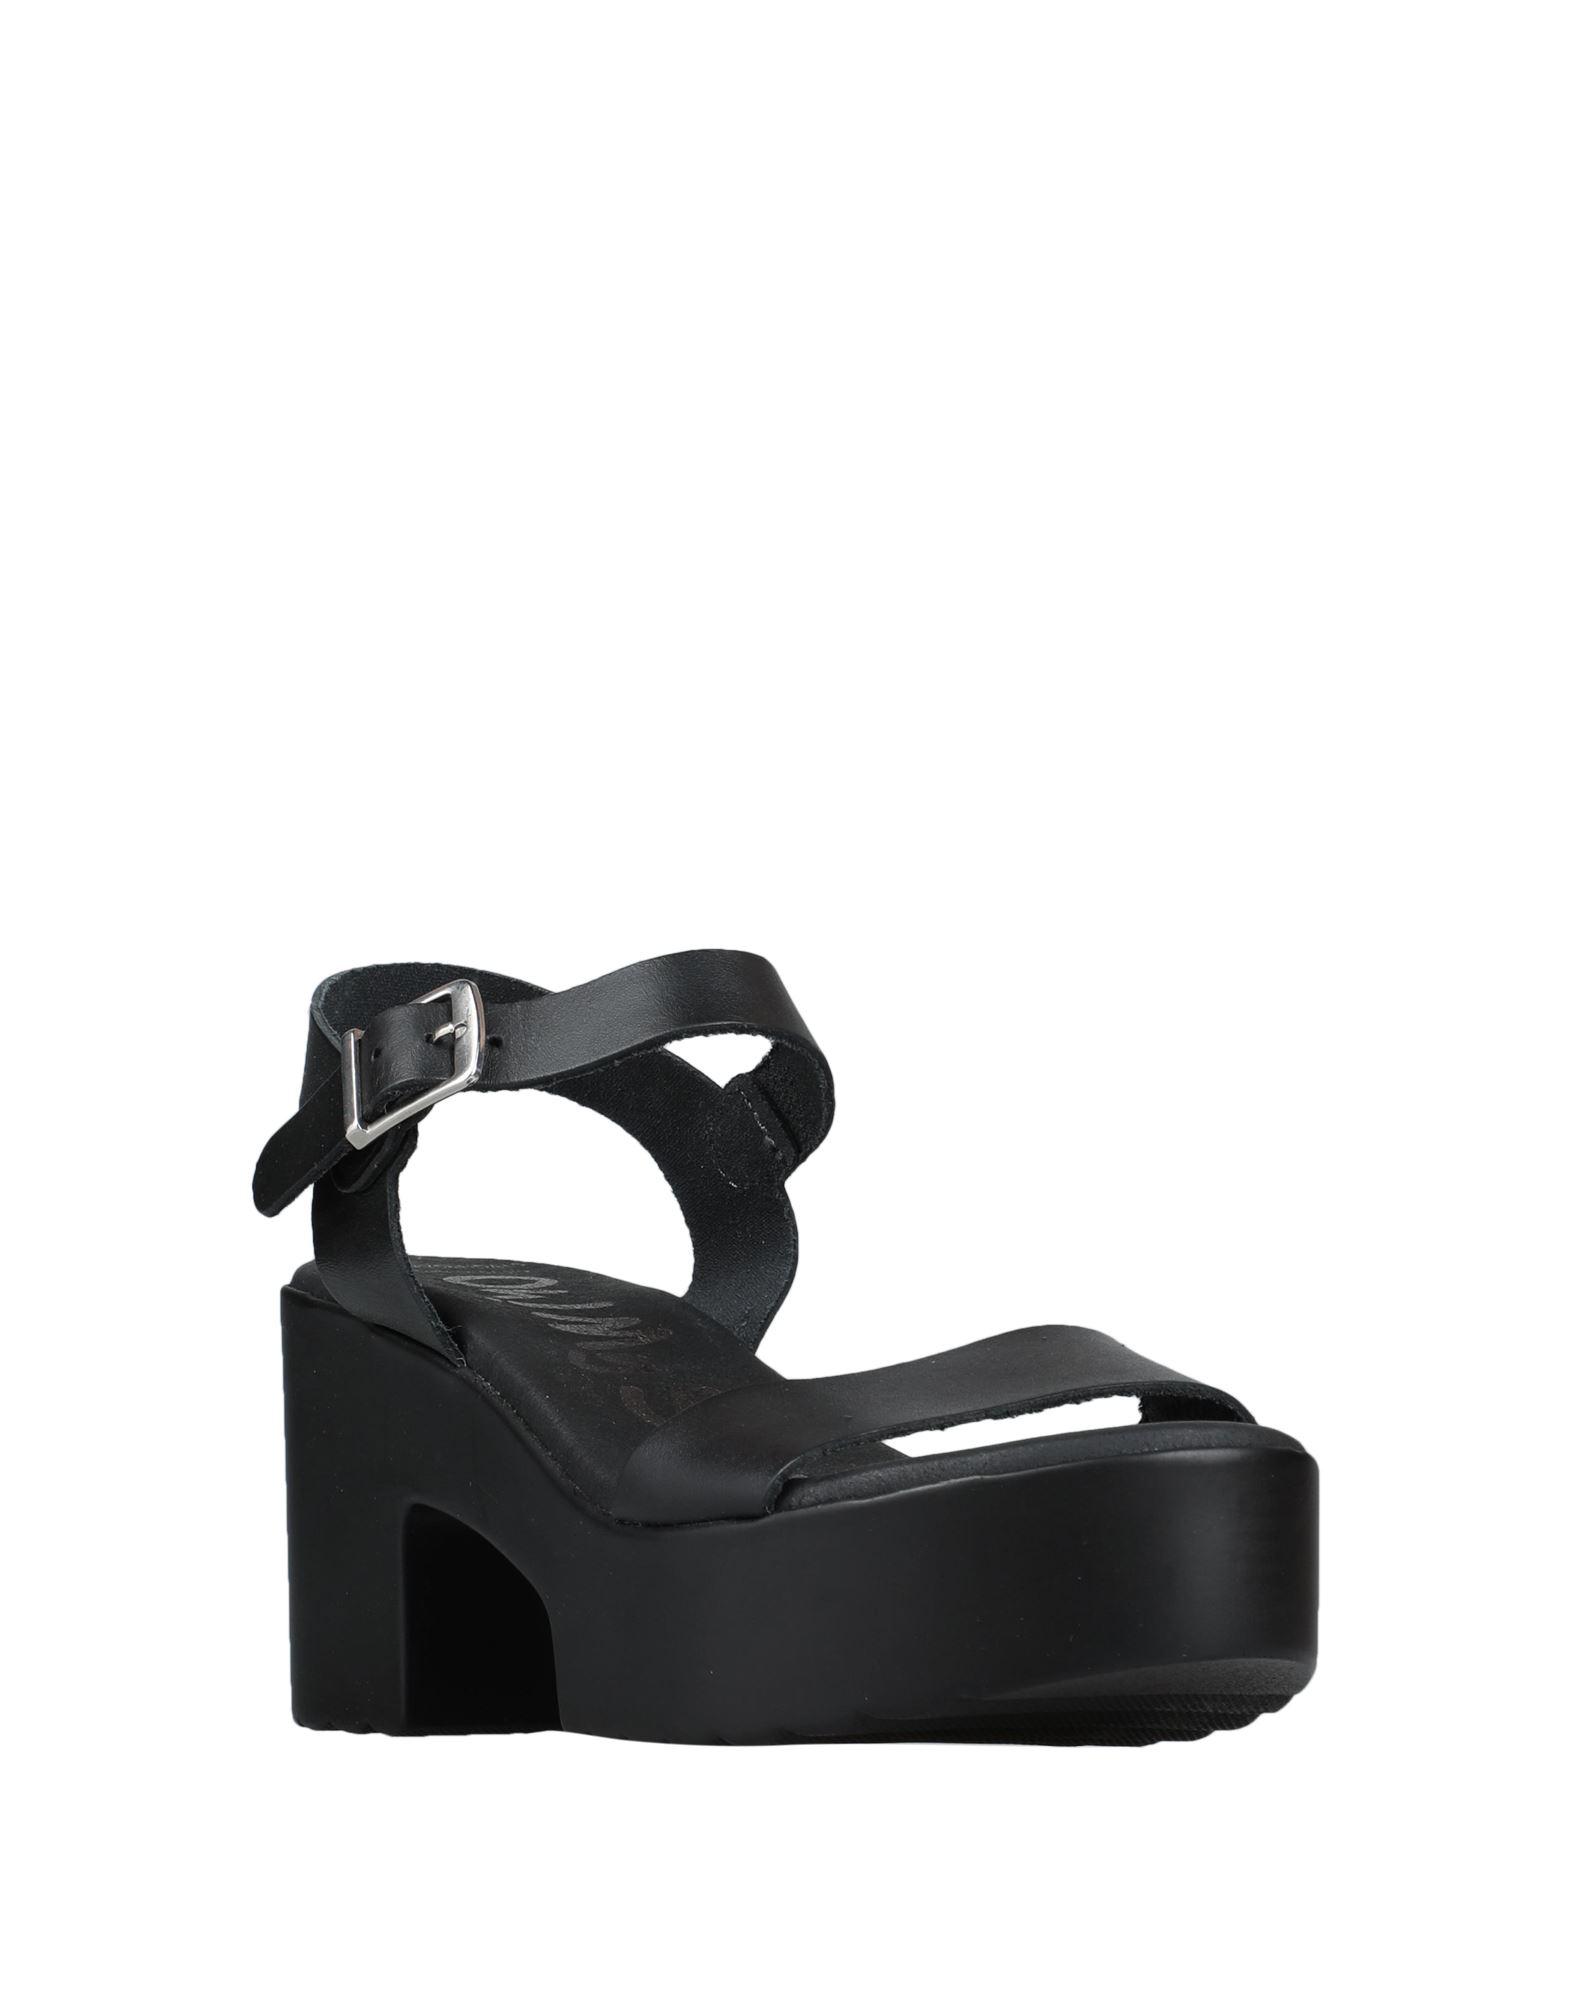 Oh My Sandals Leather Sandals in Black | Lyst